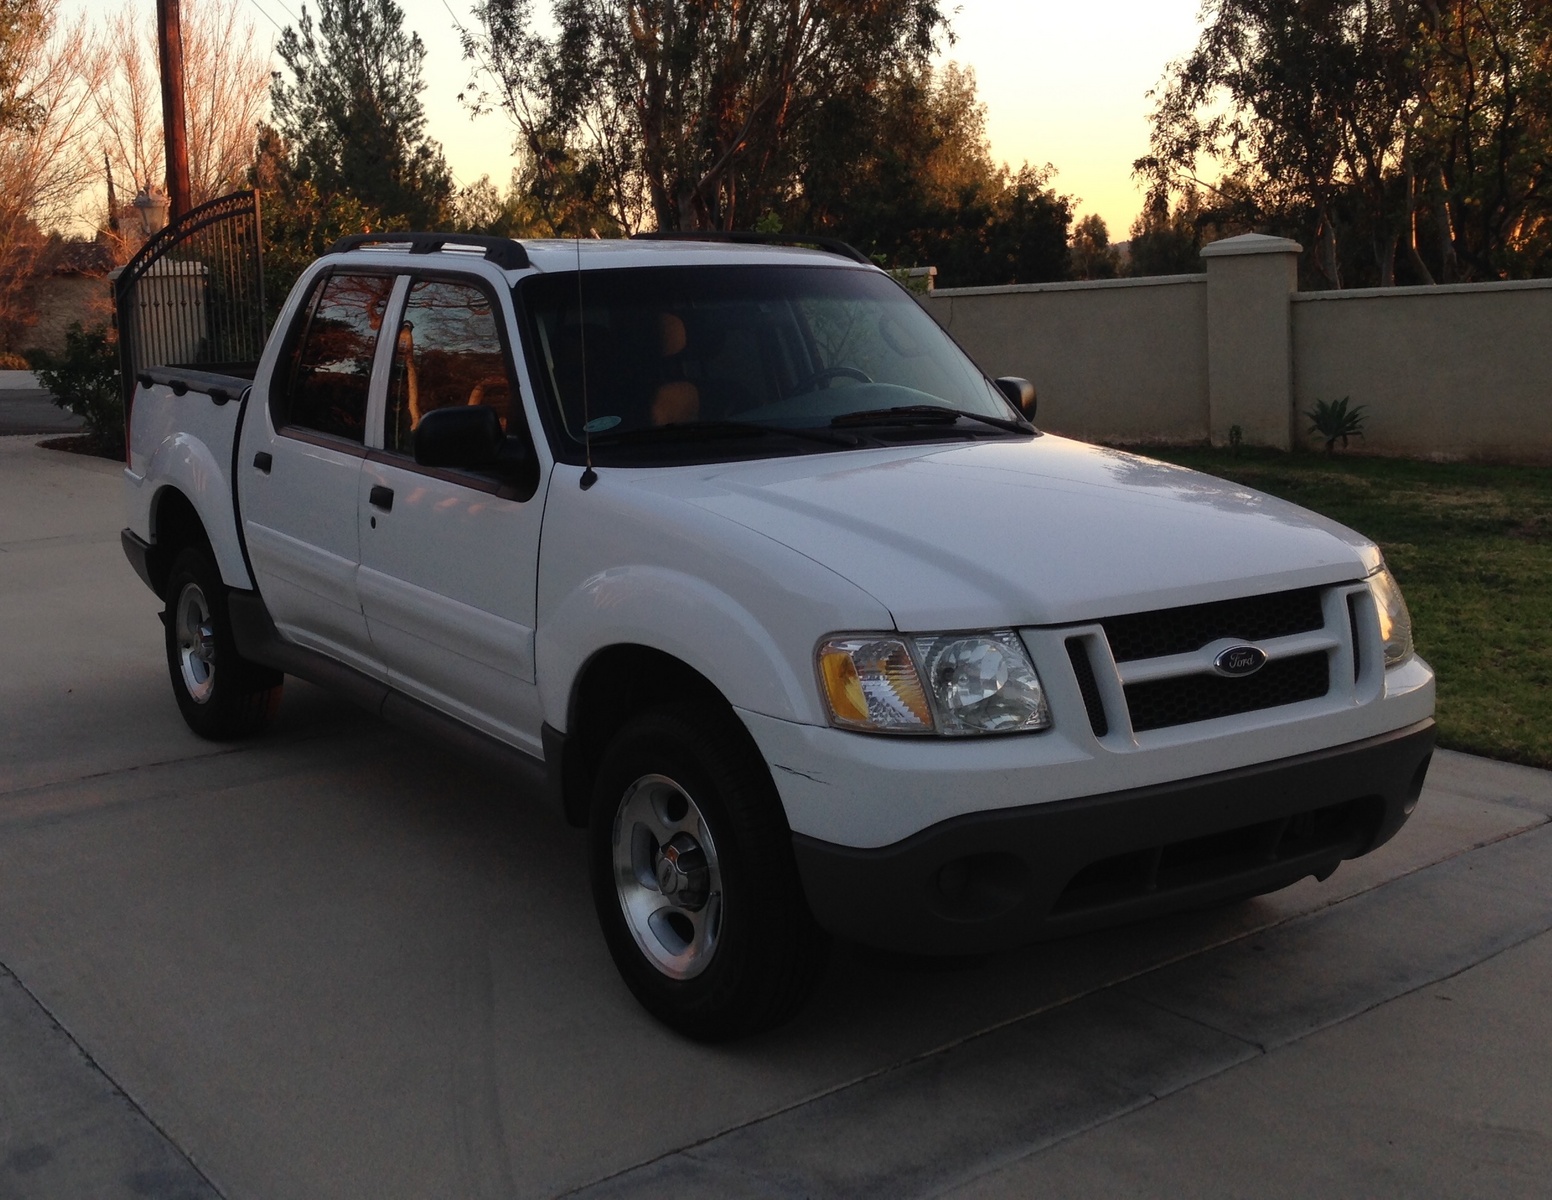 2003 Ford explorer sport trac safety #4